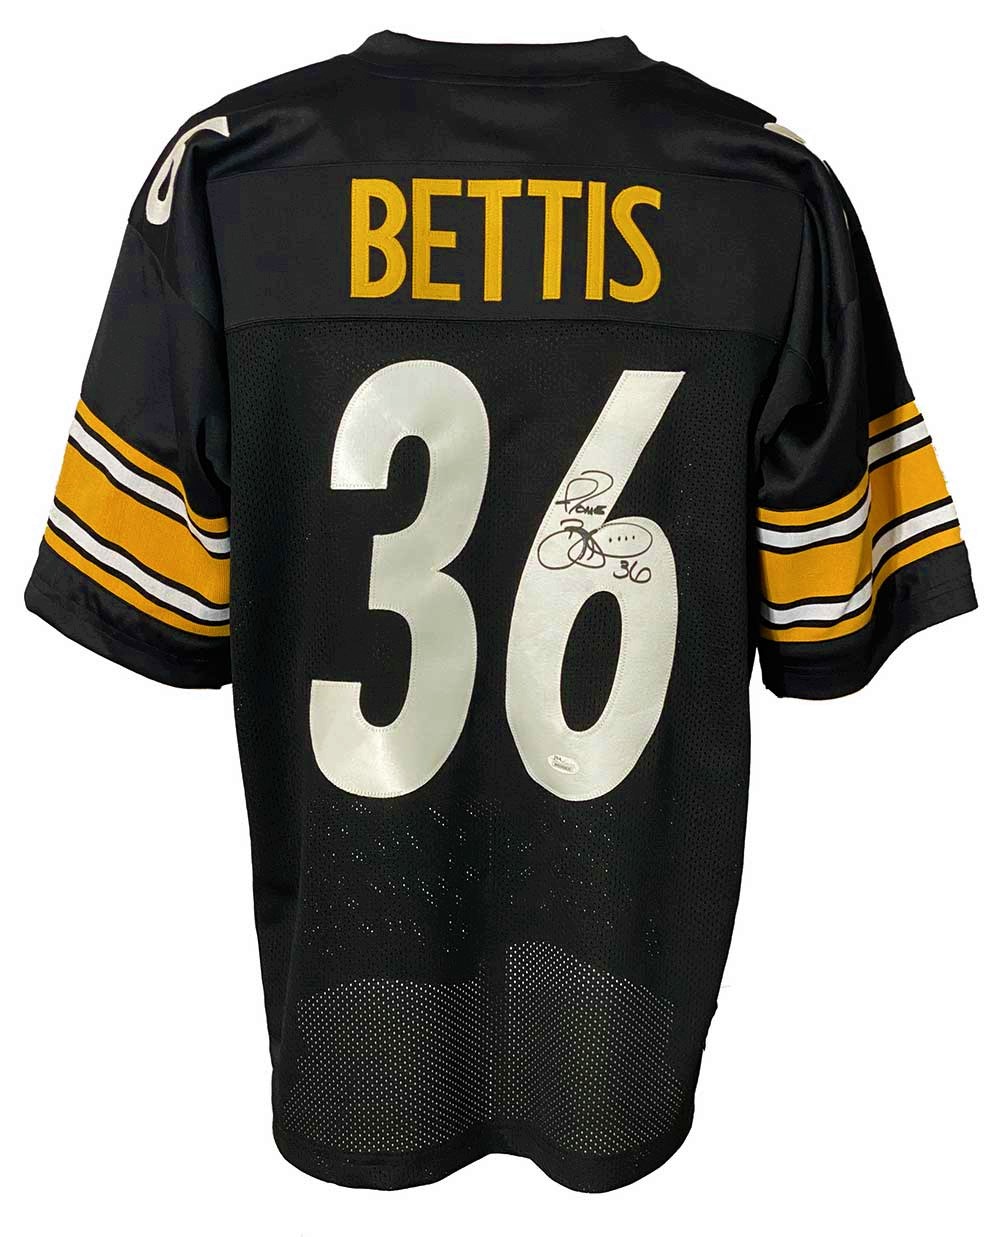 Pittsburgh Steelers Jerome Bettis Autographed Pro Style Black Jersey JSA Authenticated